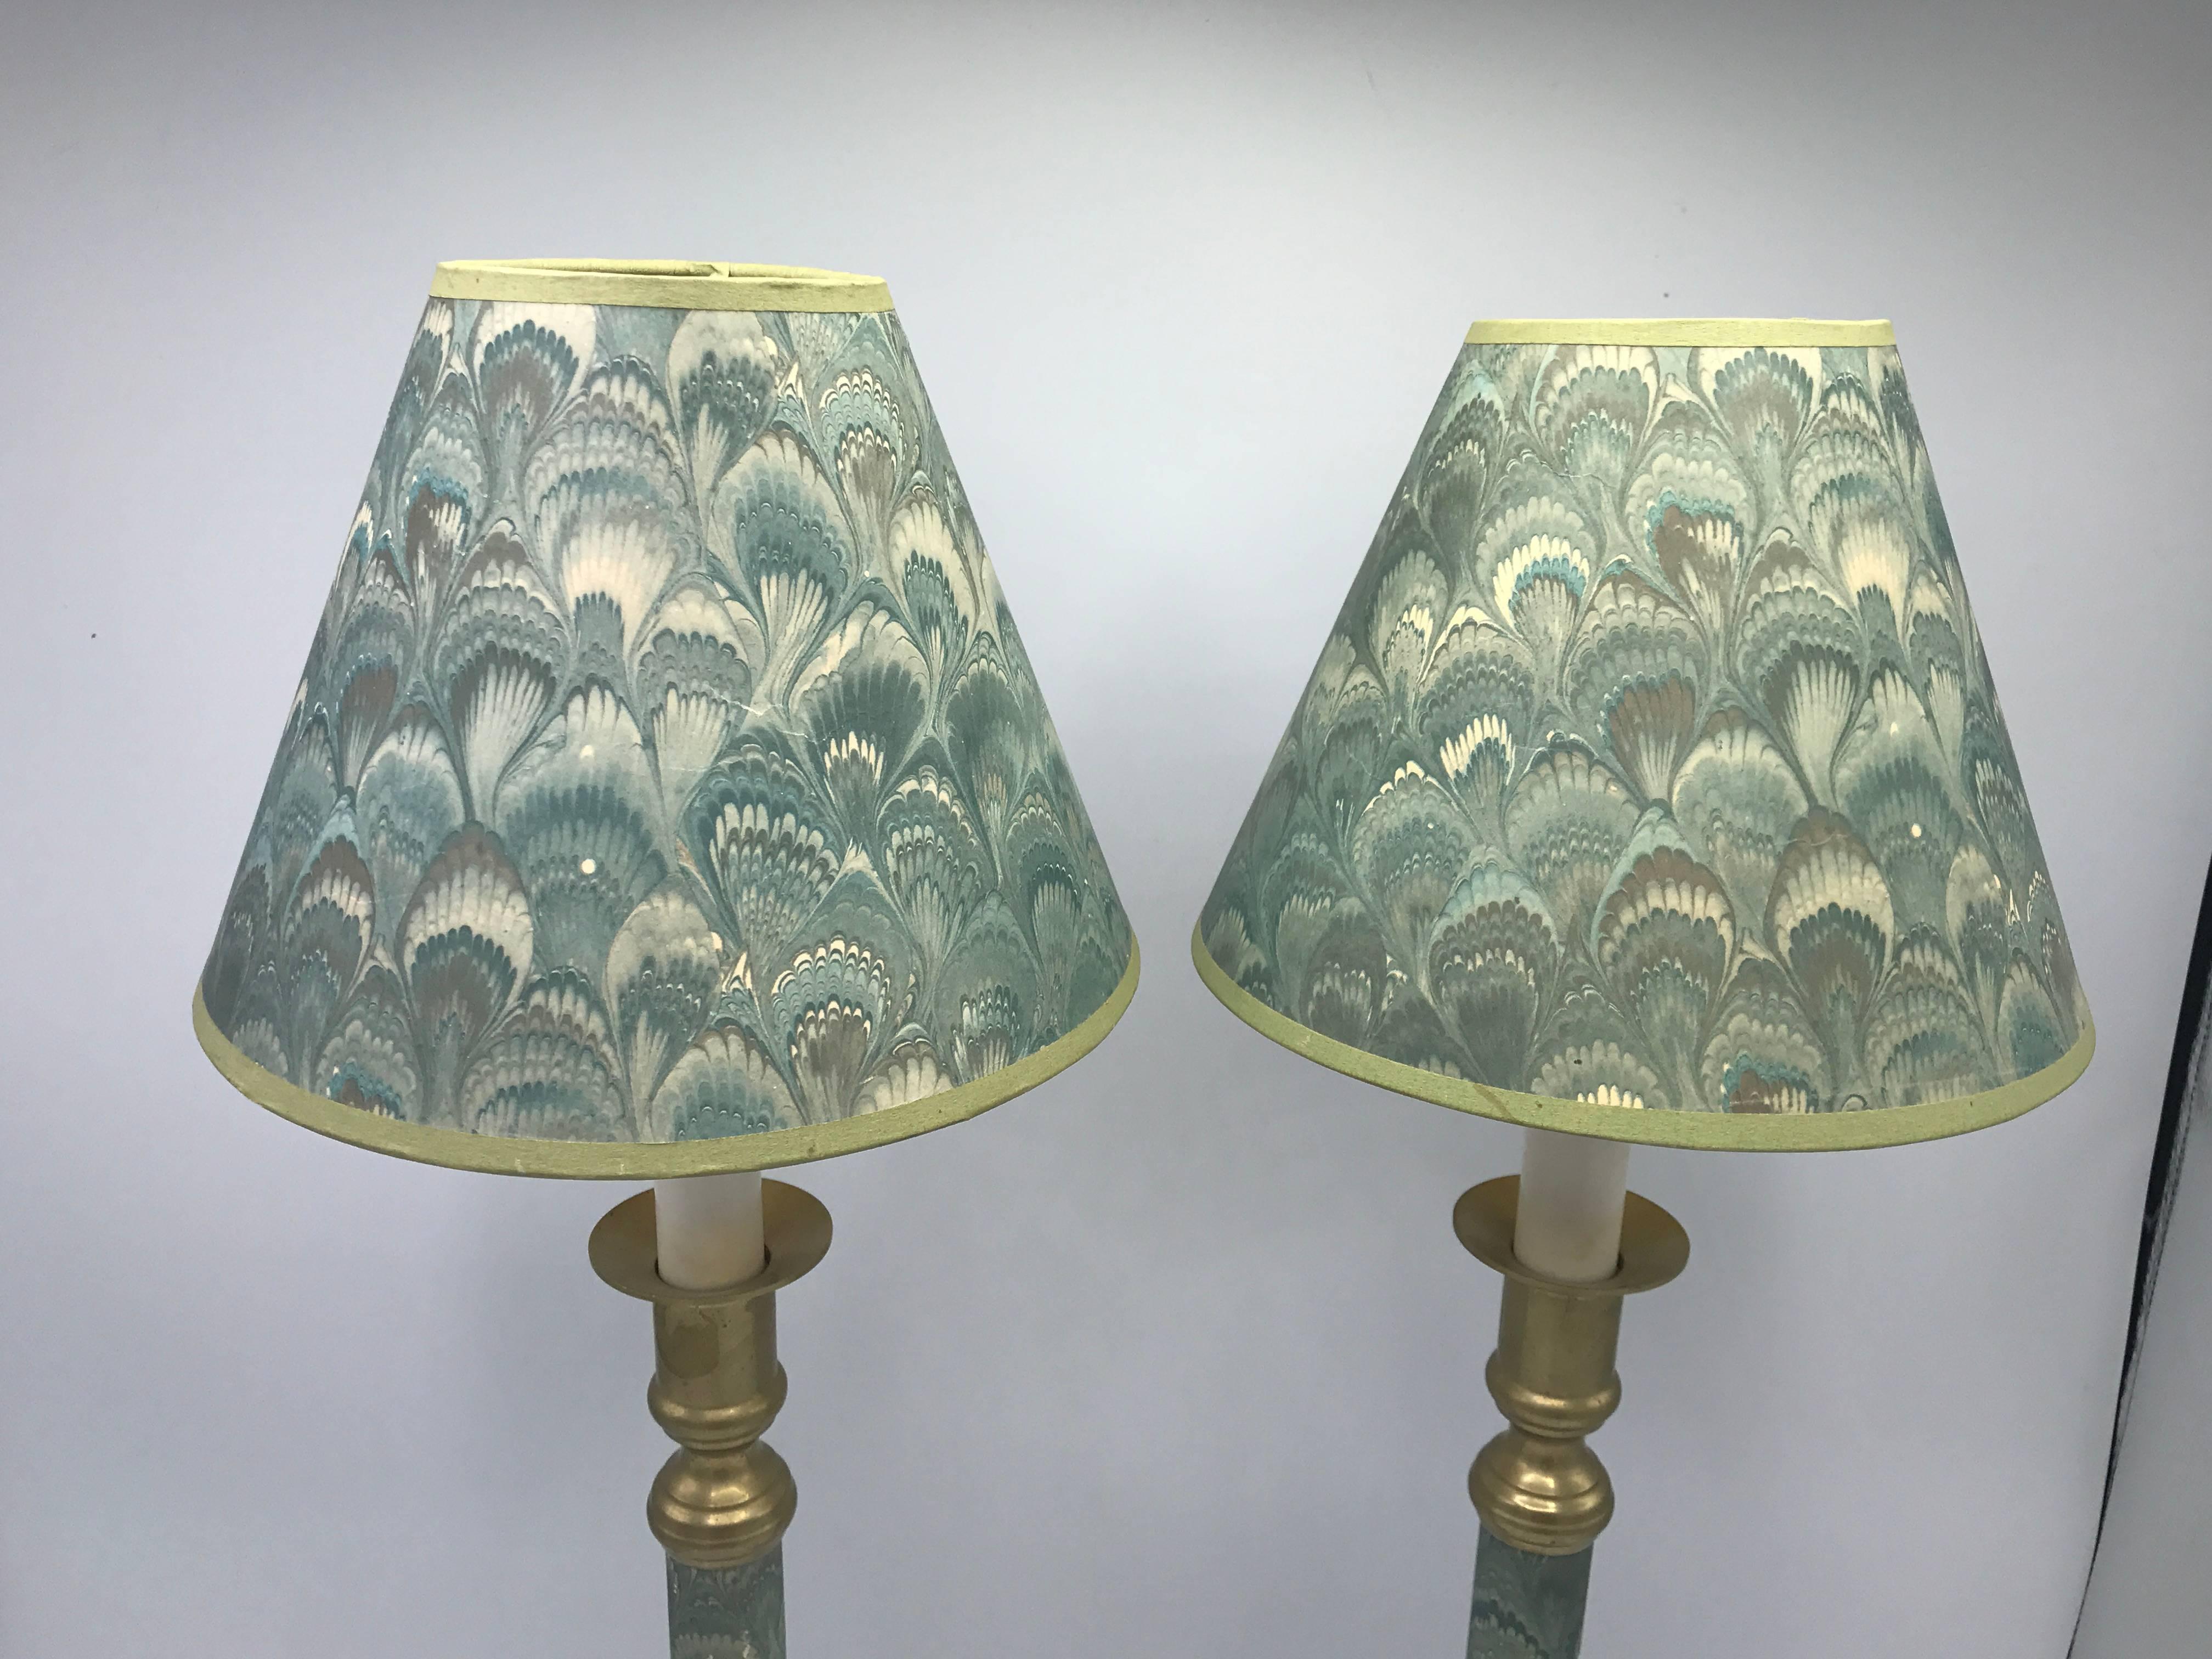 Offered is a gorgeous, pair of 1950s blue-green water-print candlestick lamps with brass bases. Includes matching shades. 20.5